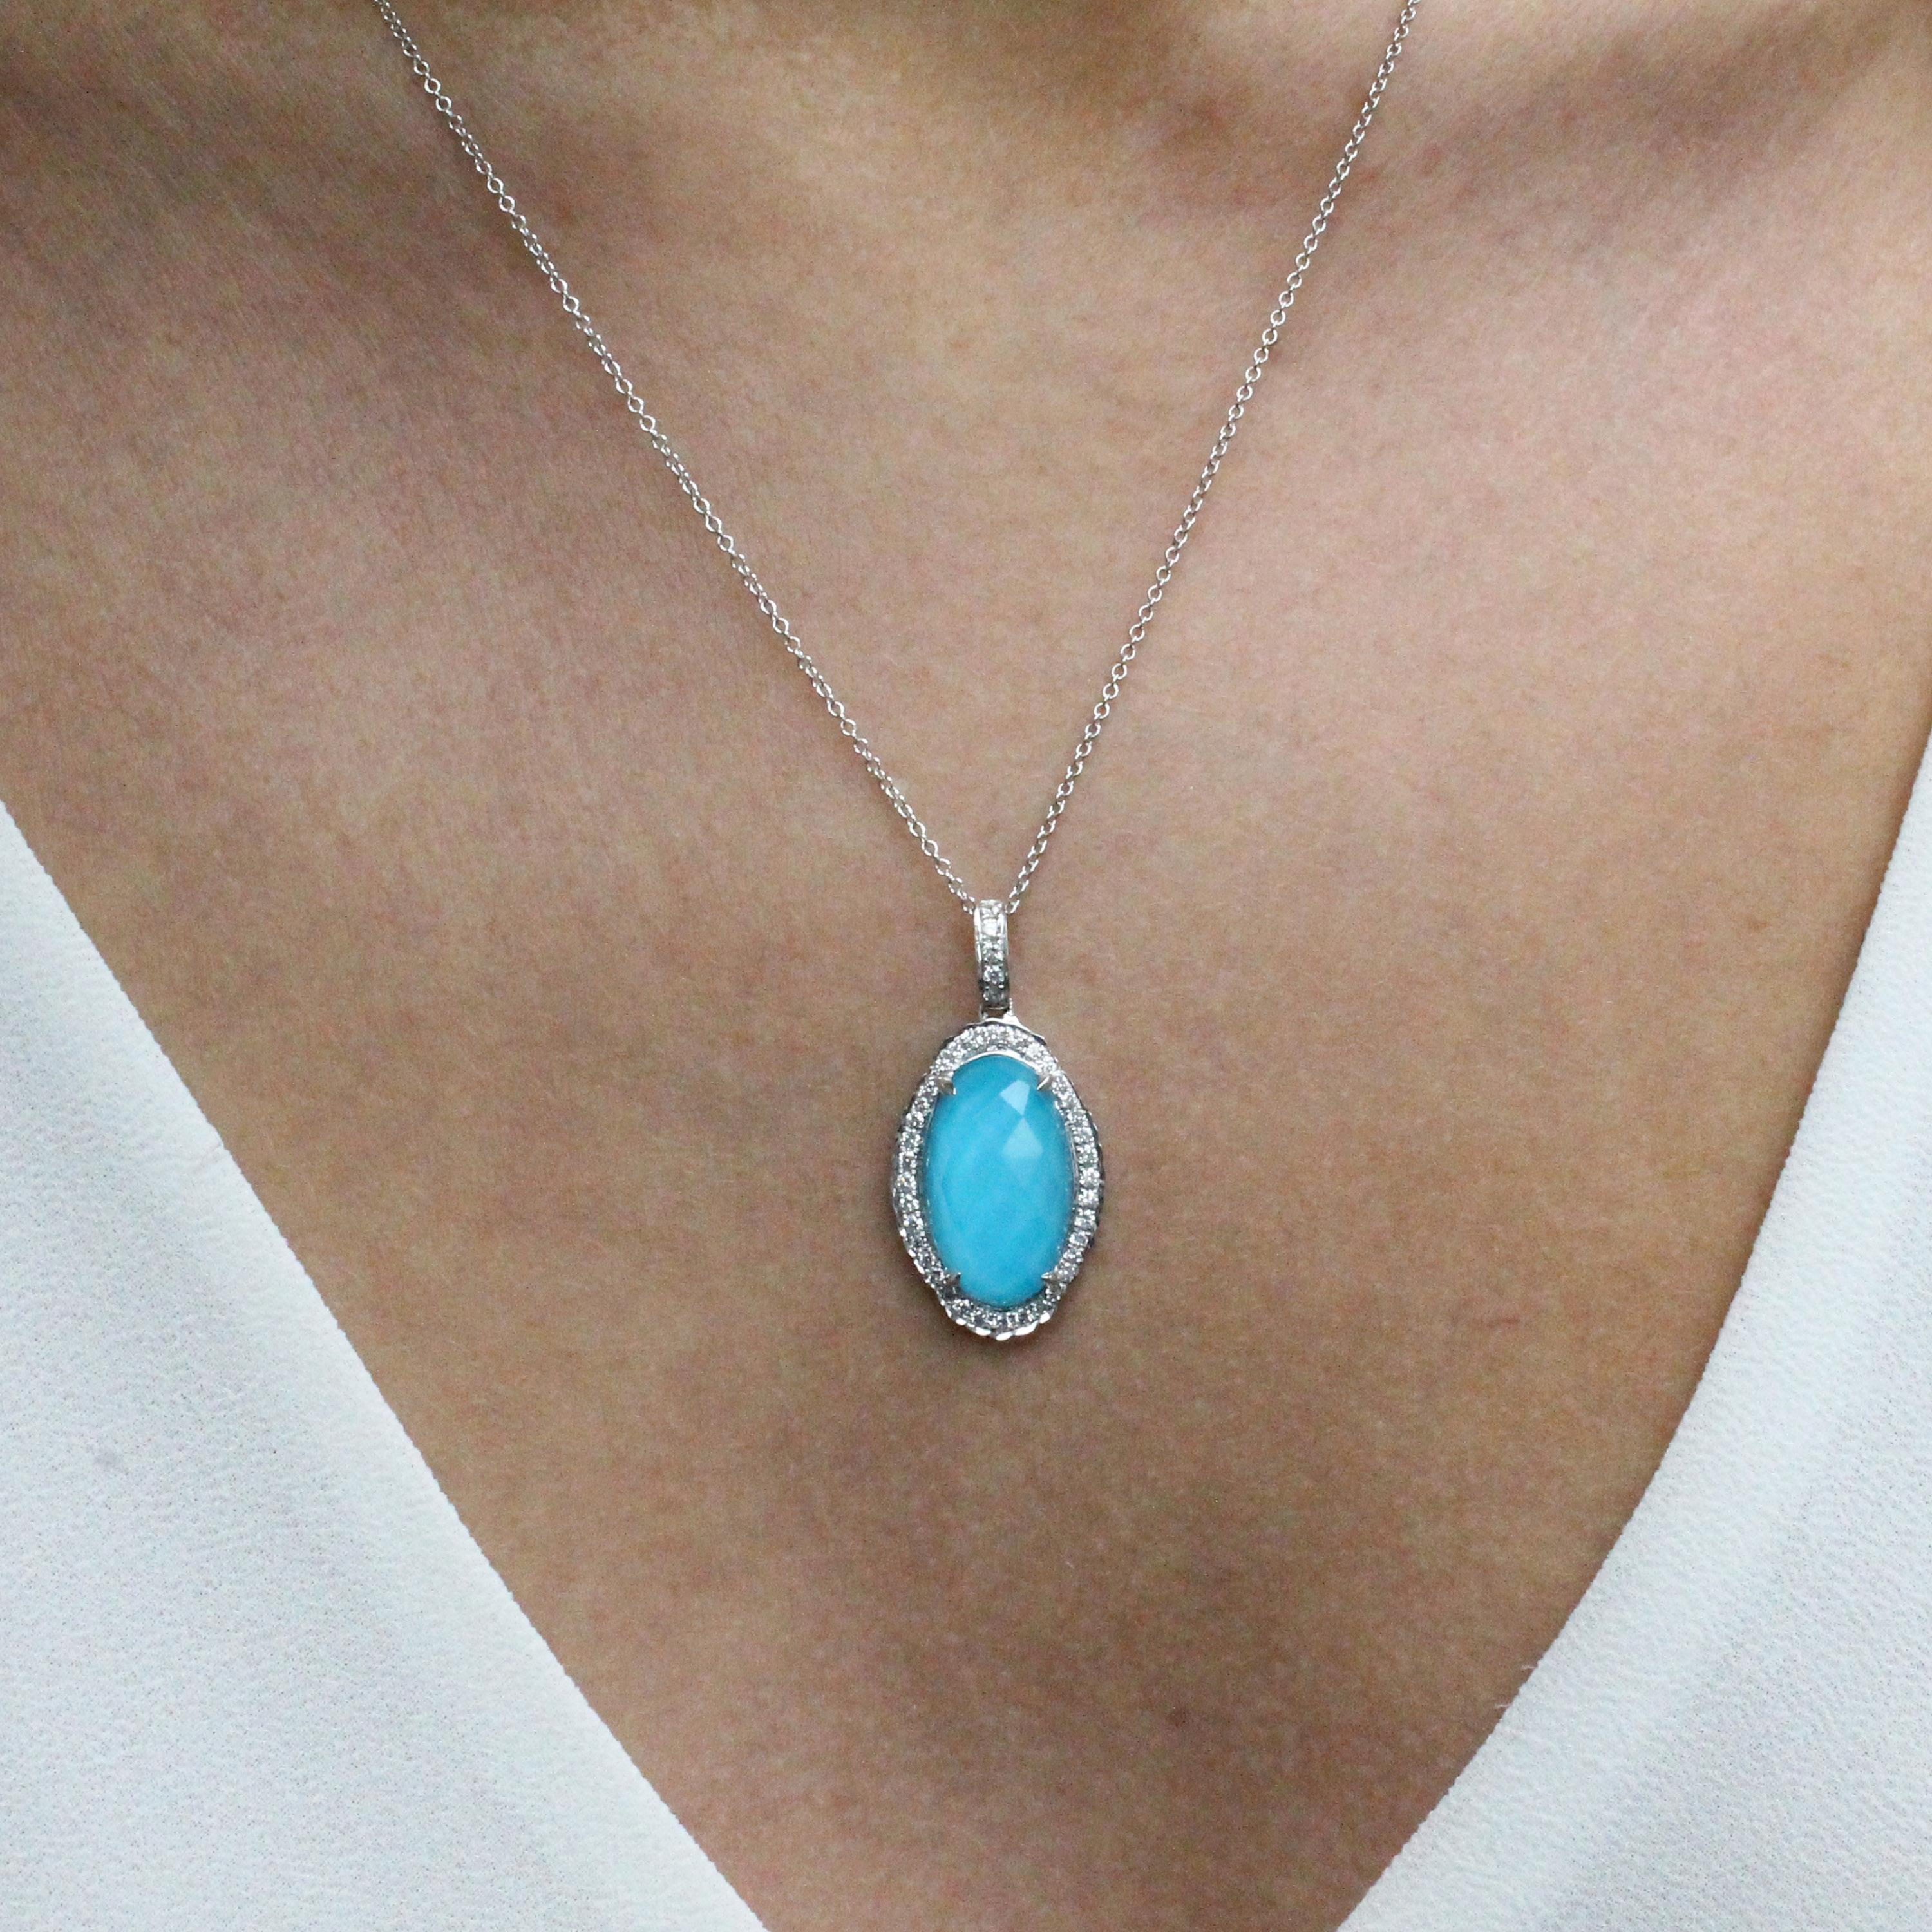 St. Barths Blue Necklace featuring an oval checker-cut, White Topaz layered with Natural Arizona Turquoise. 18